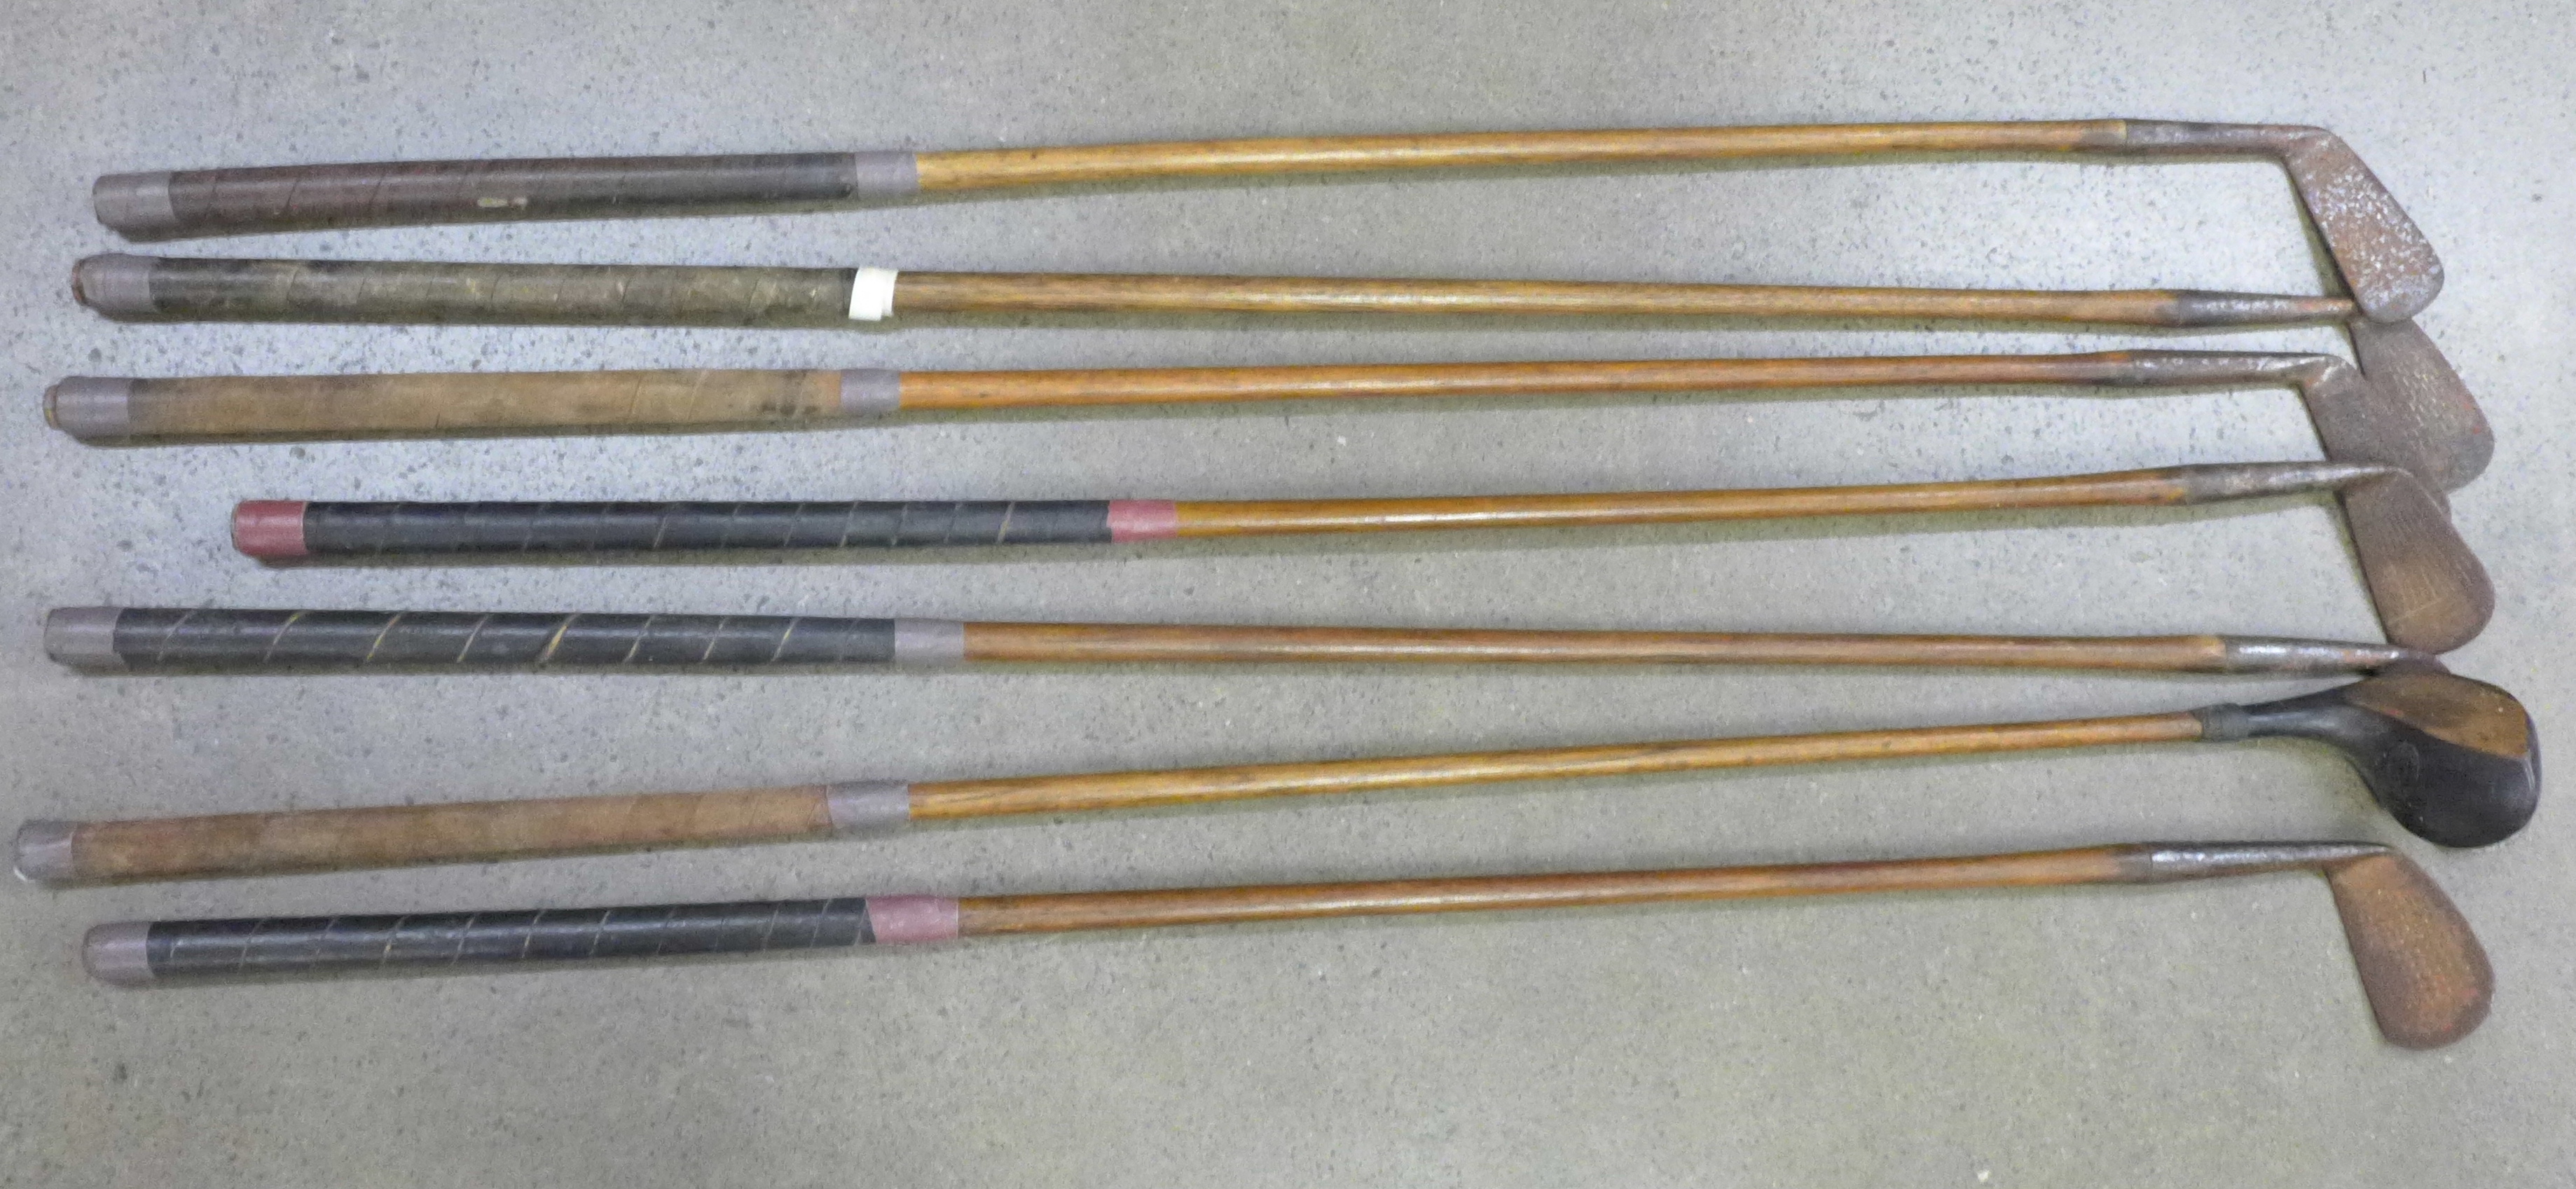 Seven hickory shafted golf clubs including Mashie made by Anderson & Sons of St. Andrews, Jiggers by